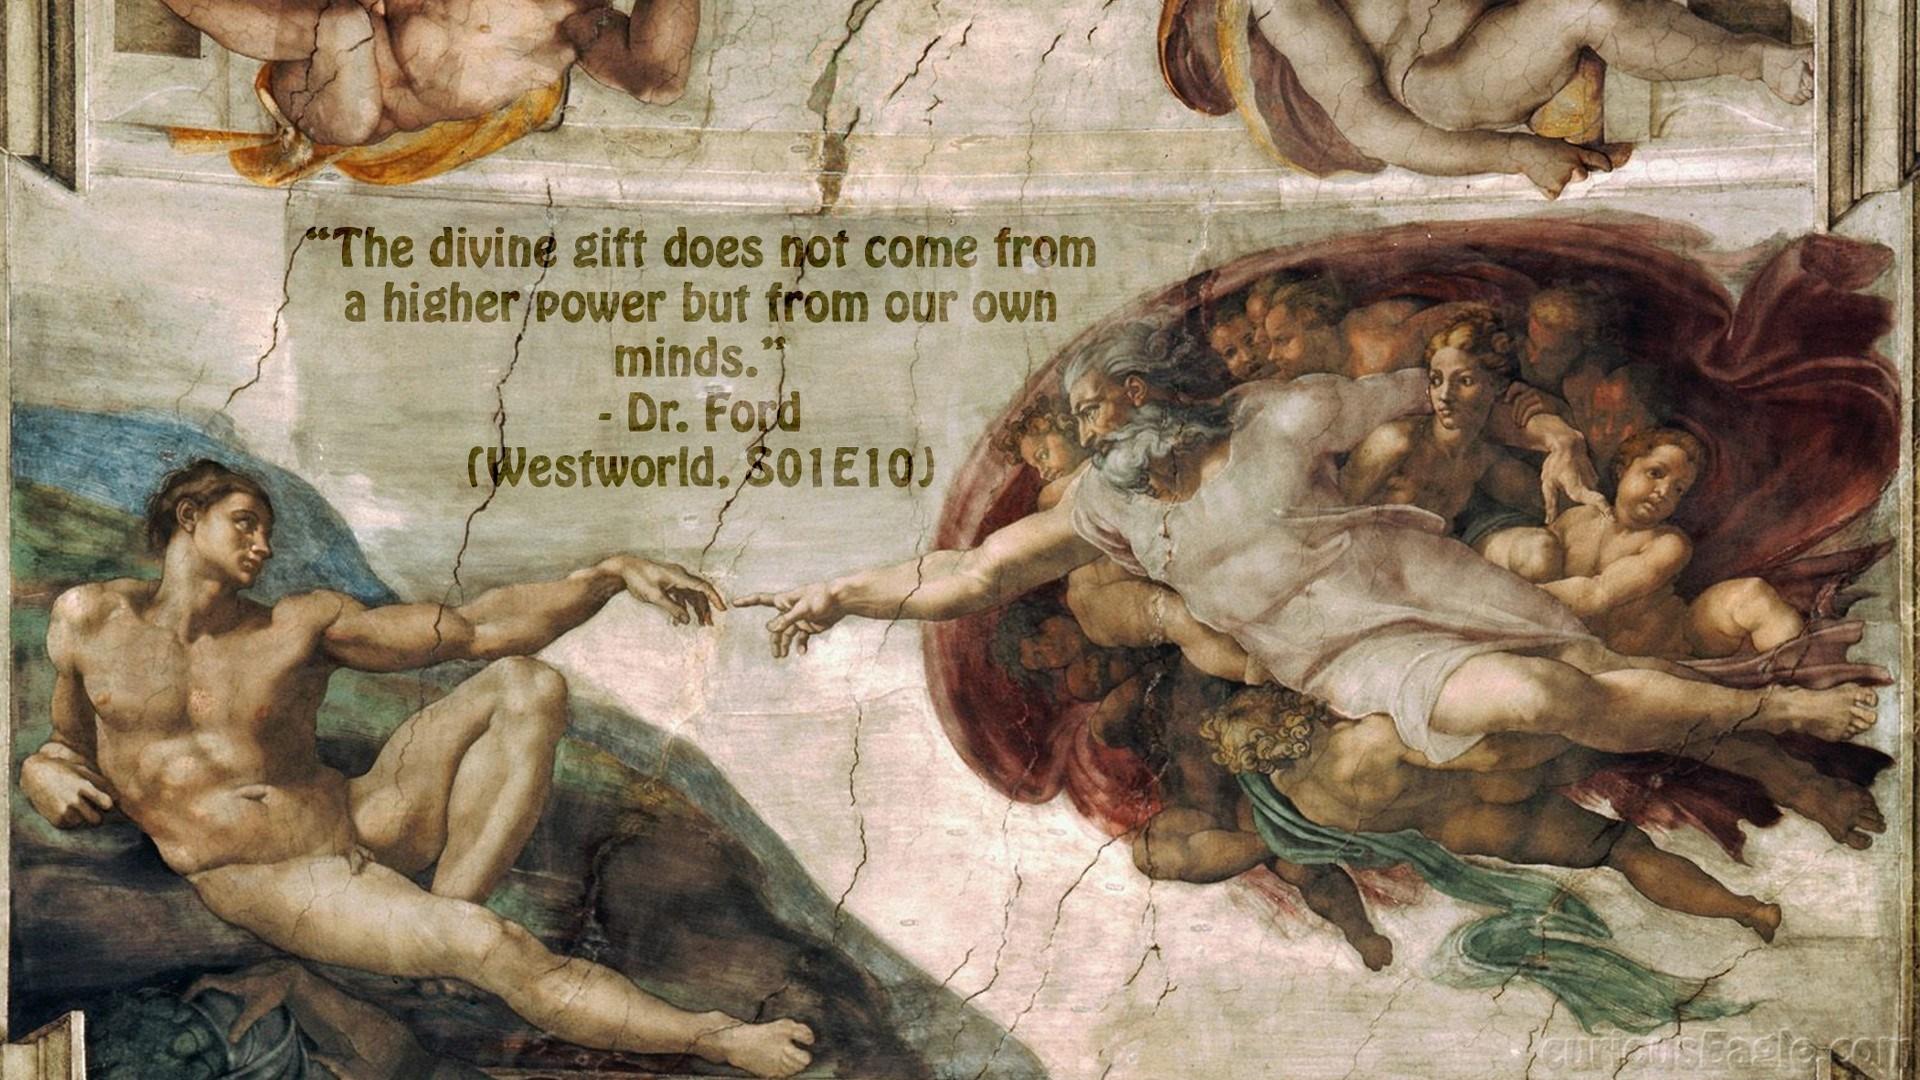 Westworld Quote And Creation Of Adam By Michelangelo